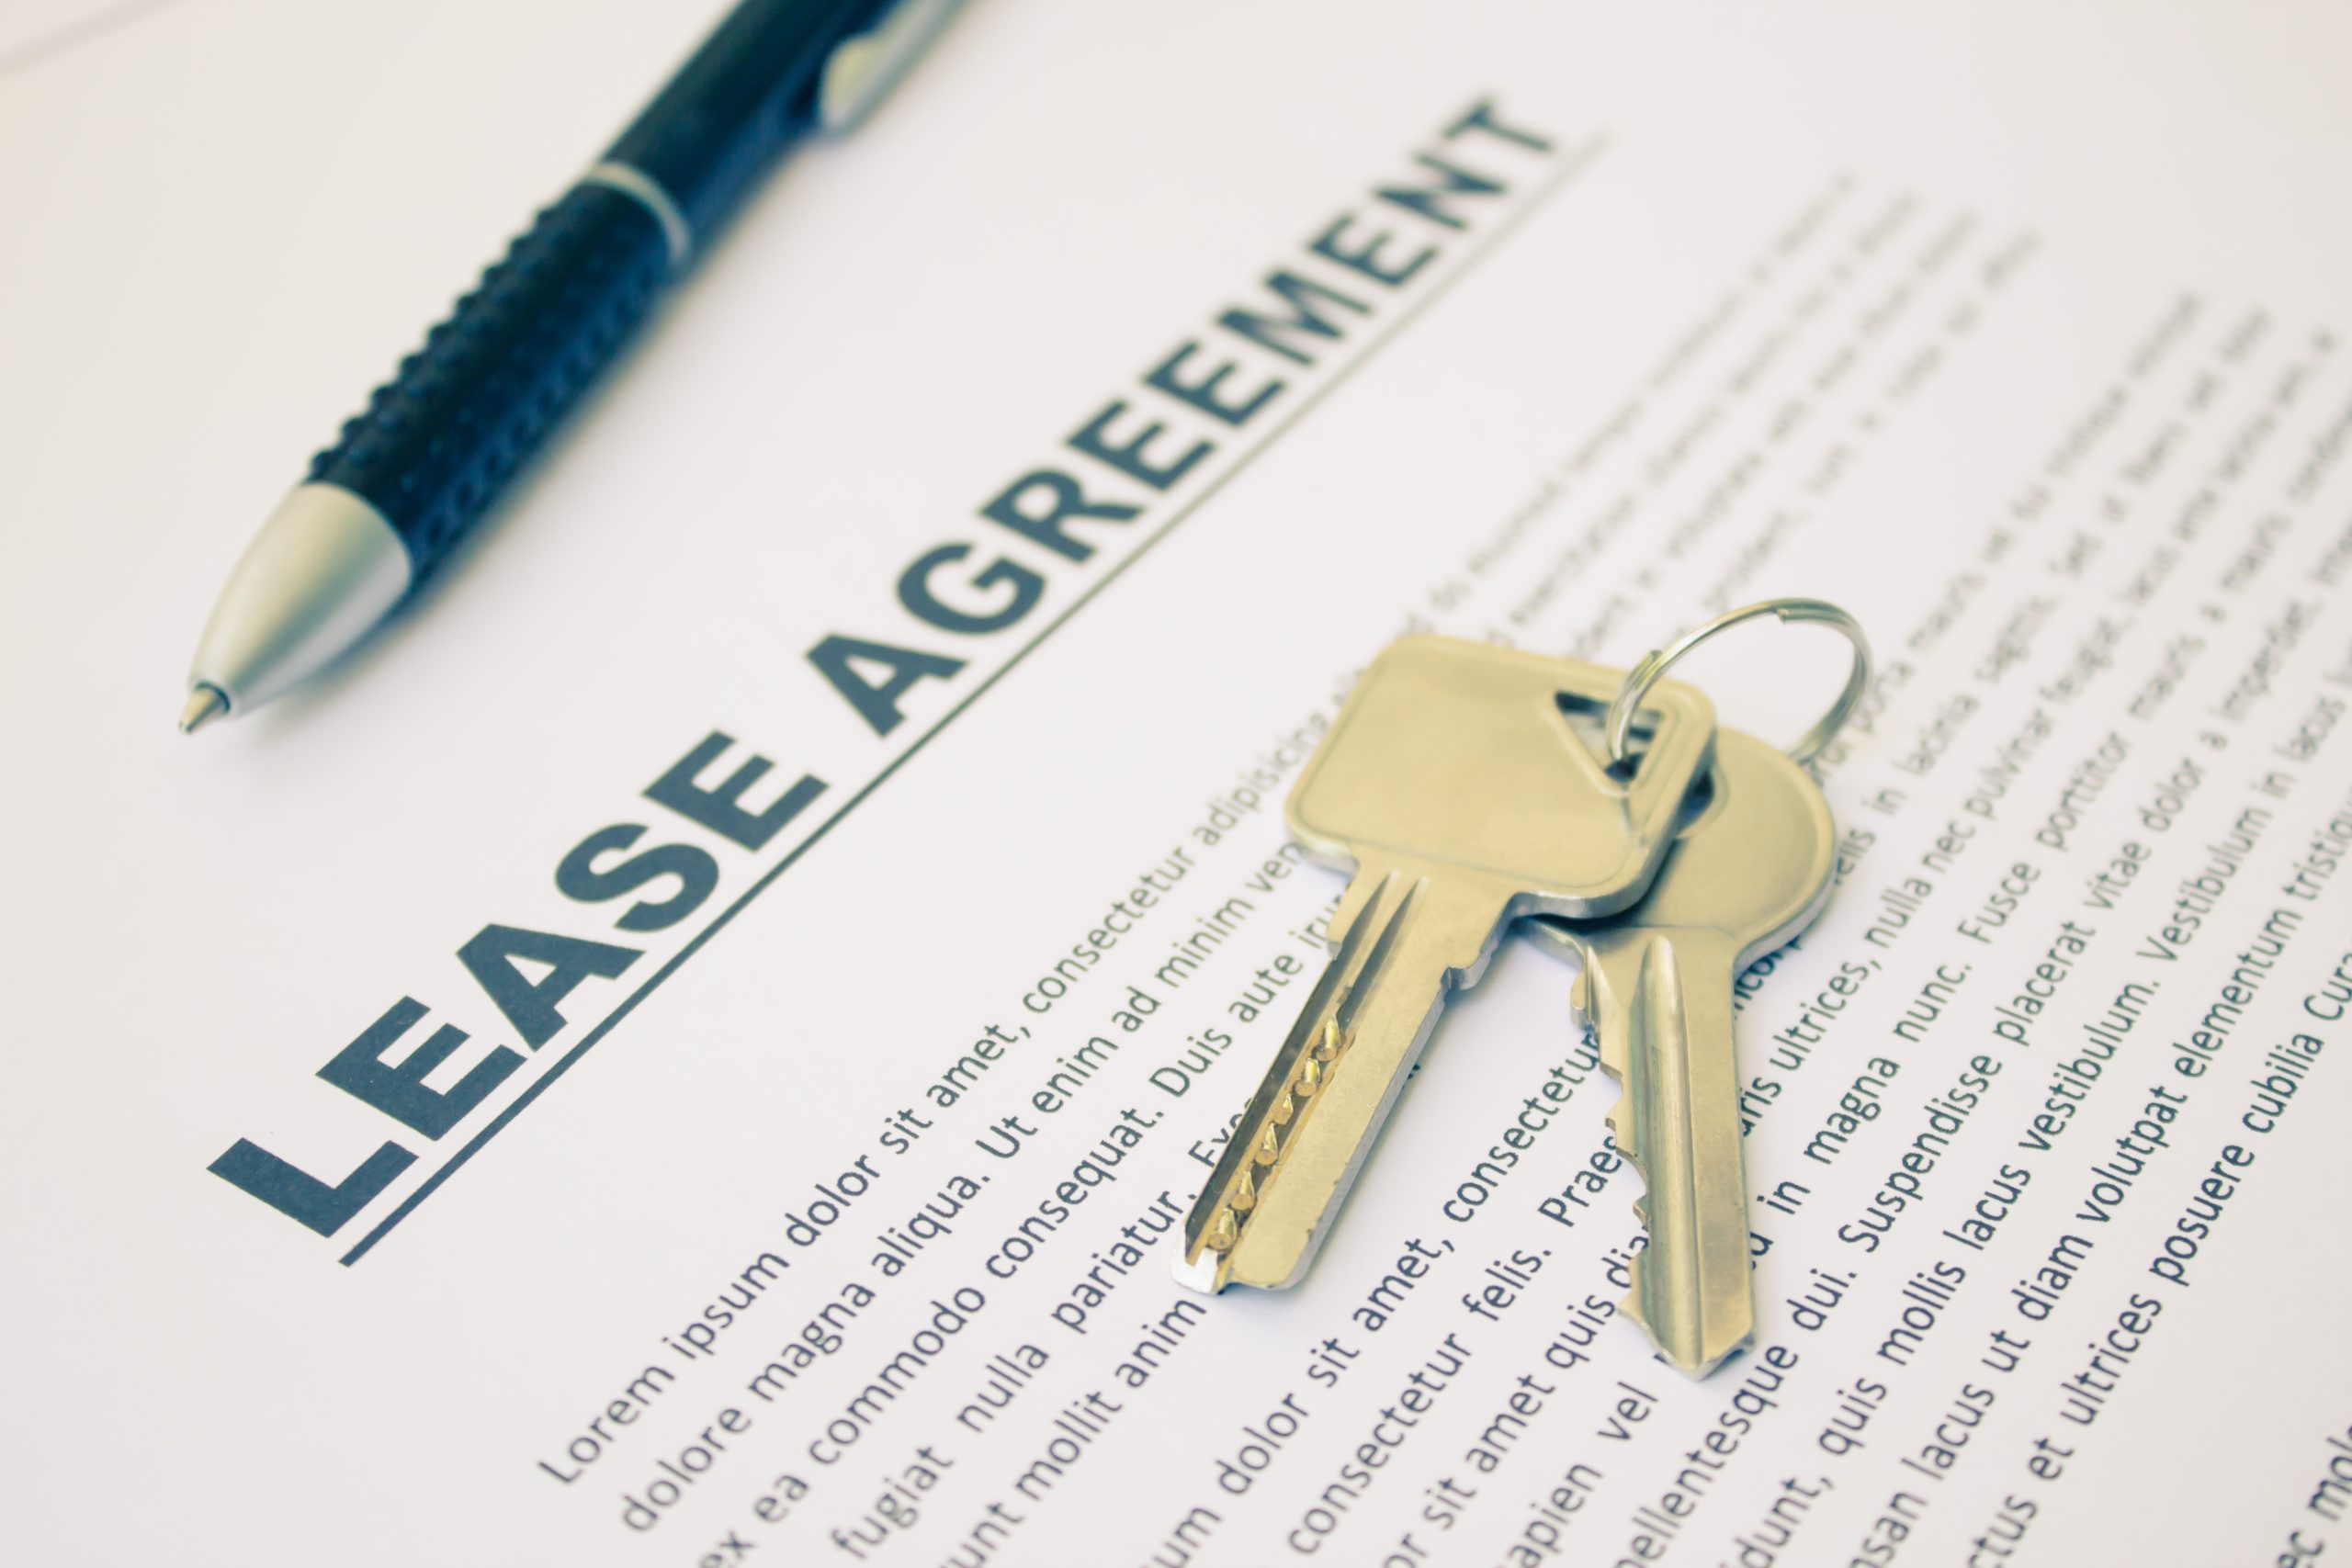 Office lease agreement with keys and pen